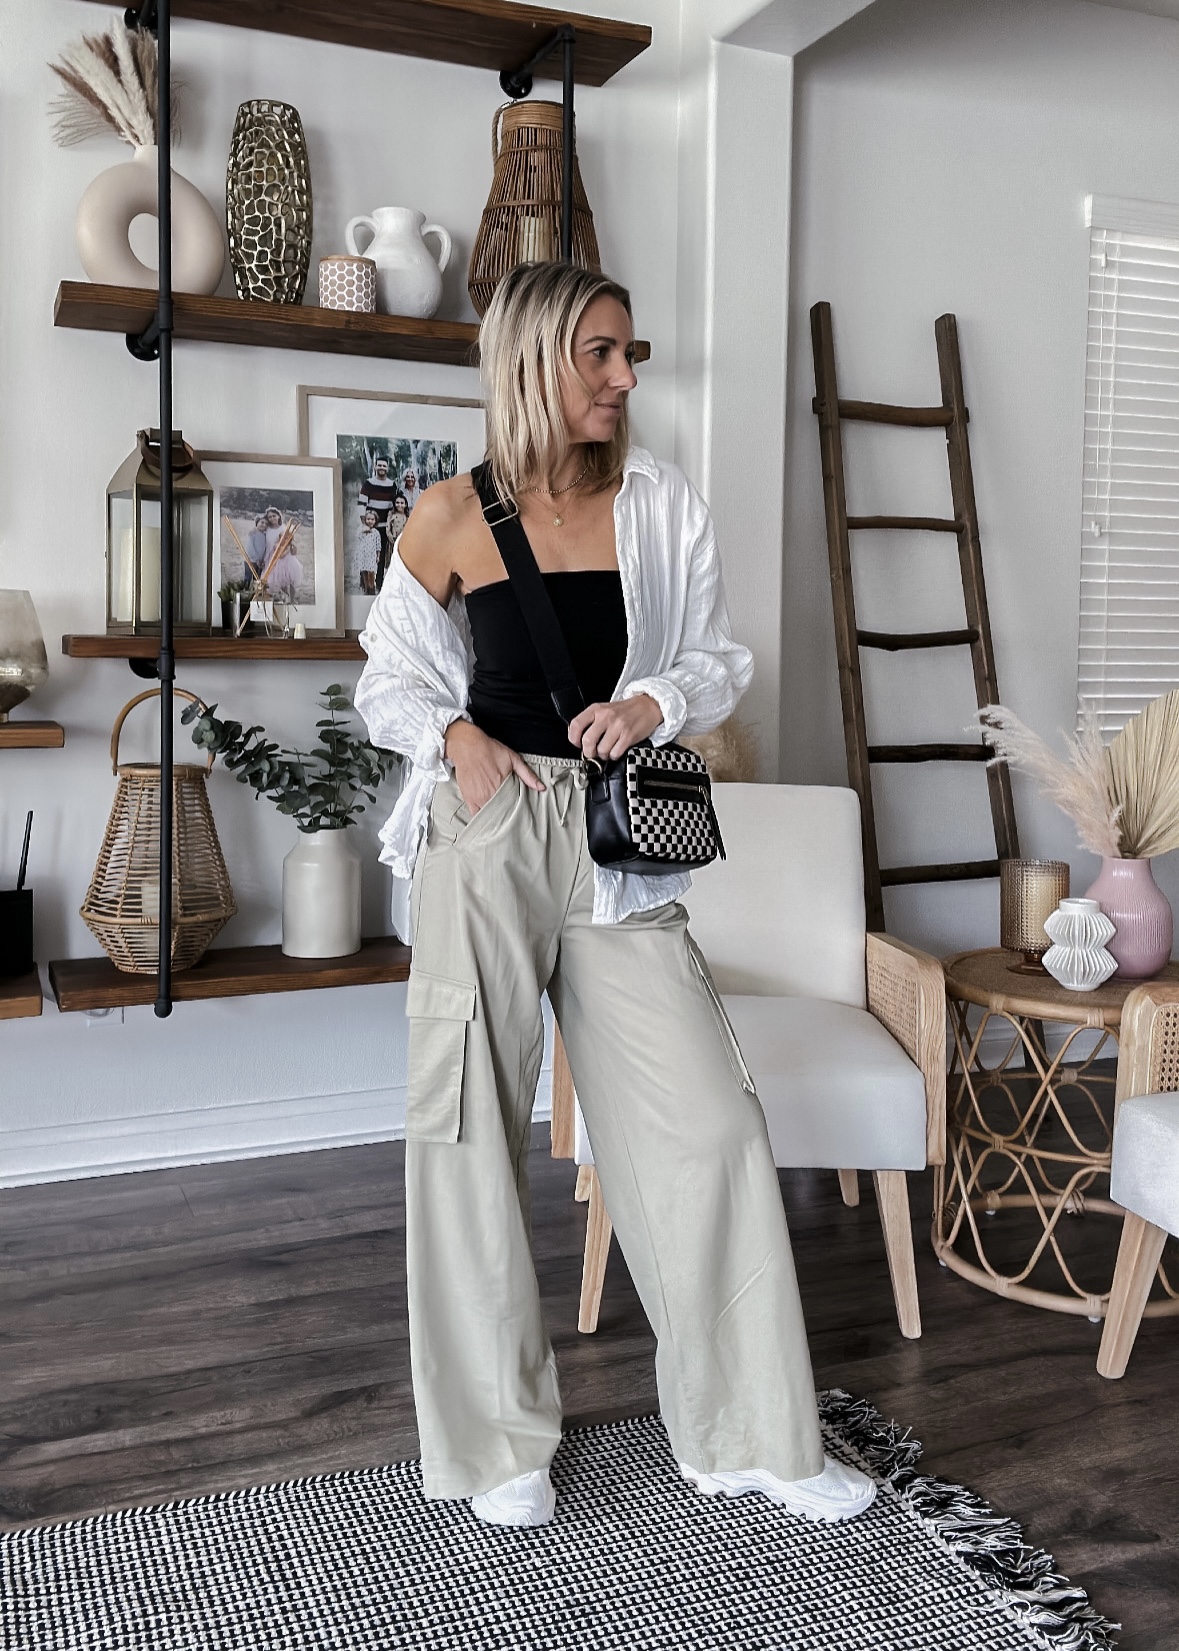 STYLING CARGO PANTS-Jaclyn De Leon style. Sharing 5 easy cargo pant outfits for every occasion from running errands to a work meeting.